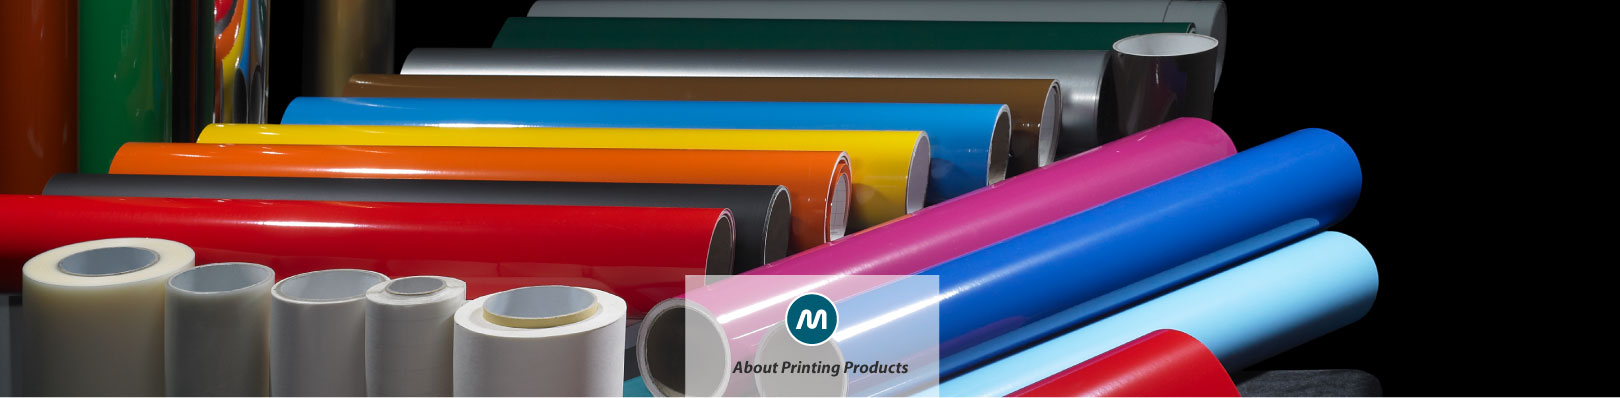 About Printing products page banner for hmi-ad | Printing products in Germany with HMi | Ordrr printing products in Germany to HMi with top prices and quality